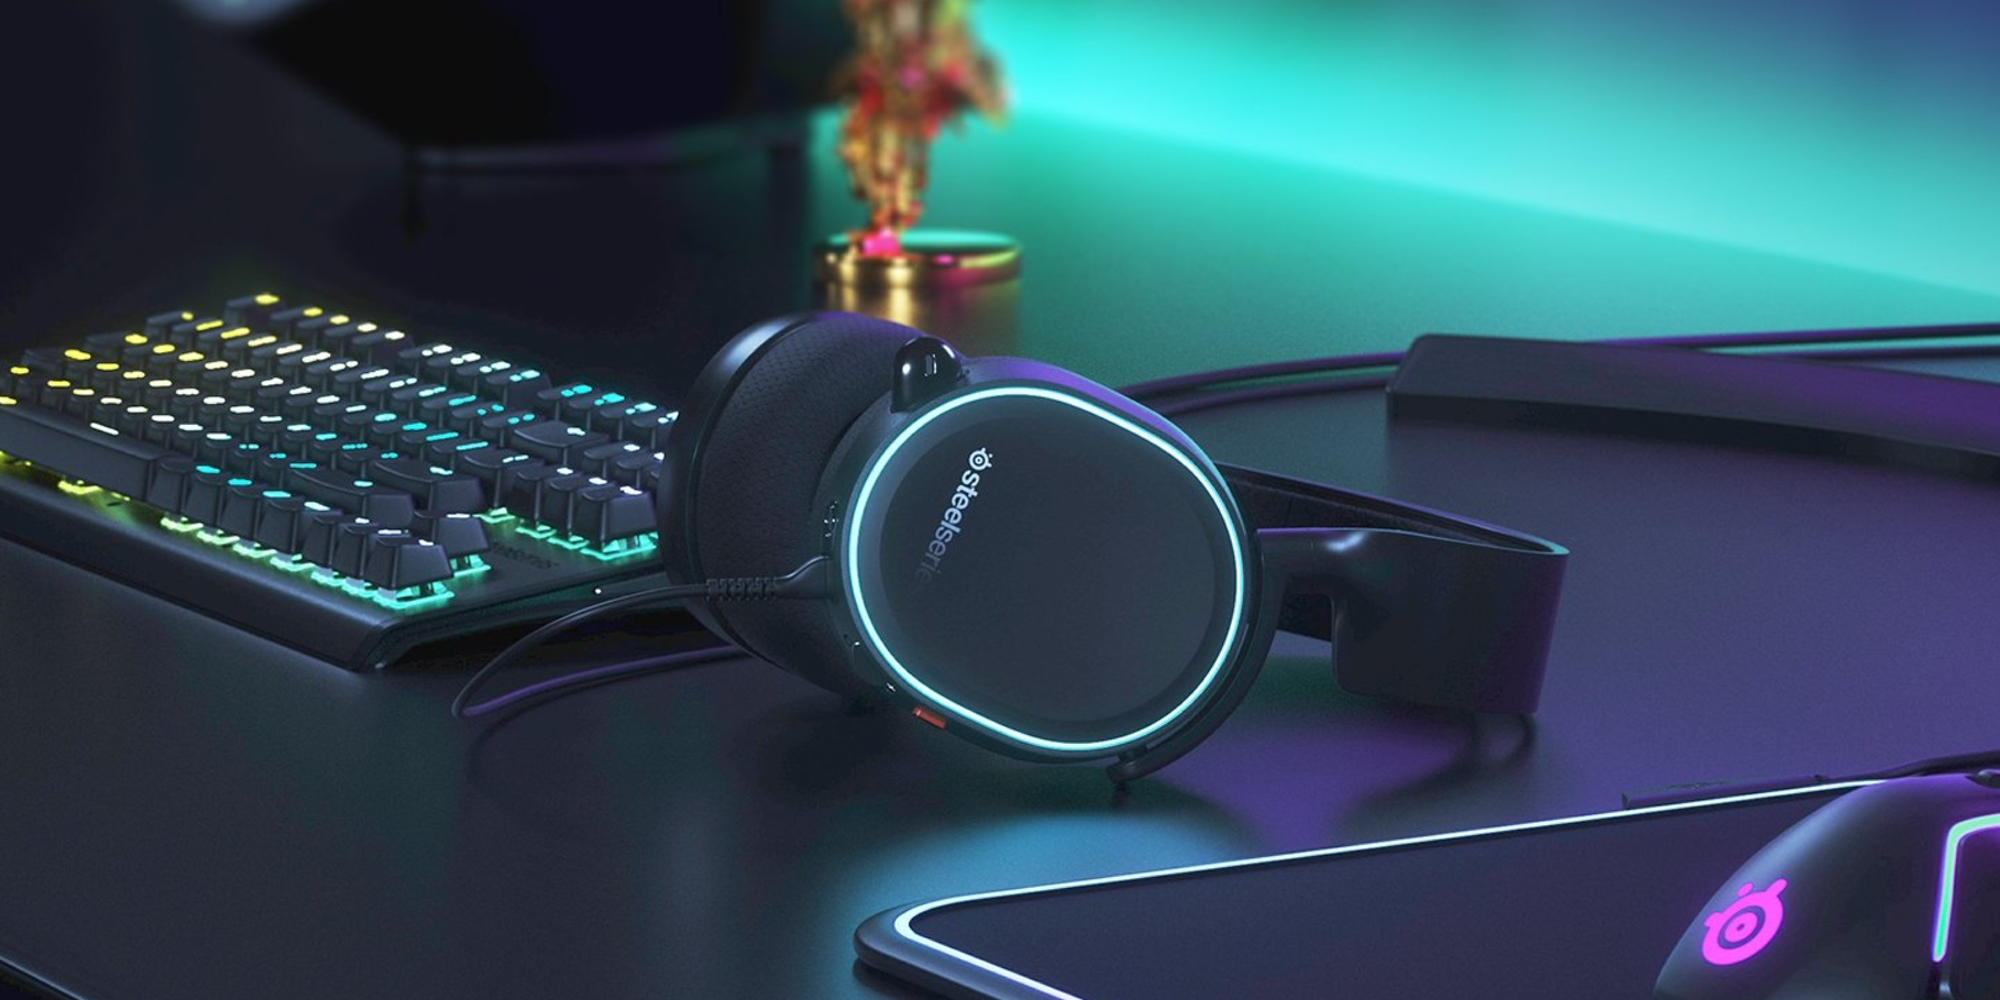 SteelSeries's new Arctis Gaming Headset RGB to your PC PS4 at $75 (25% off)